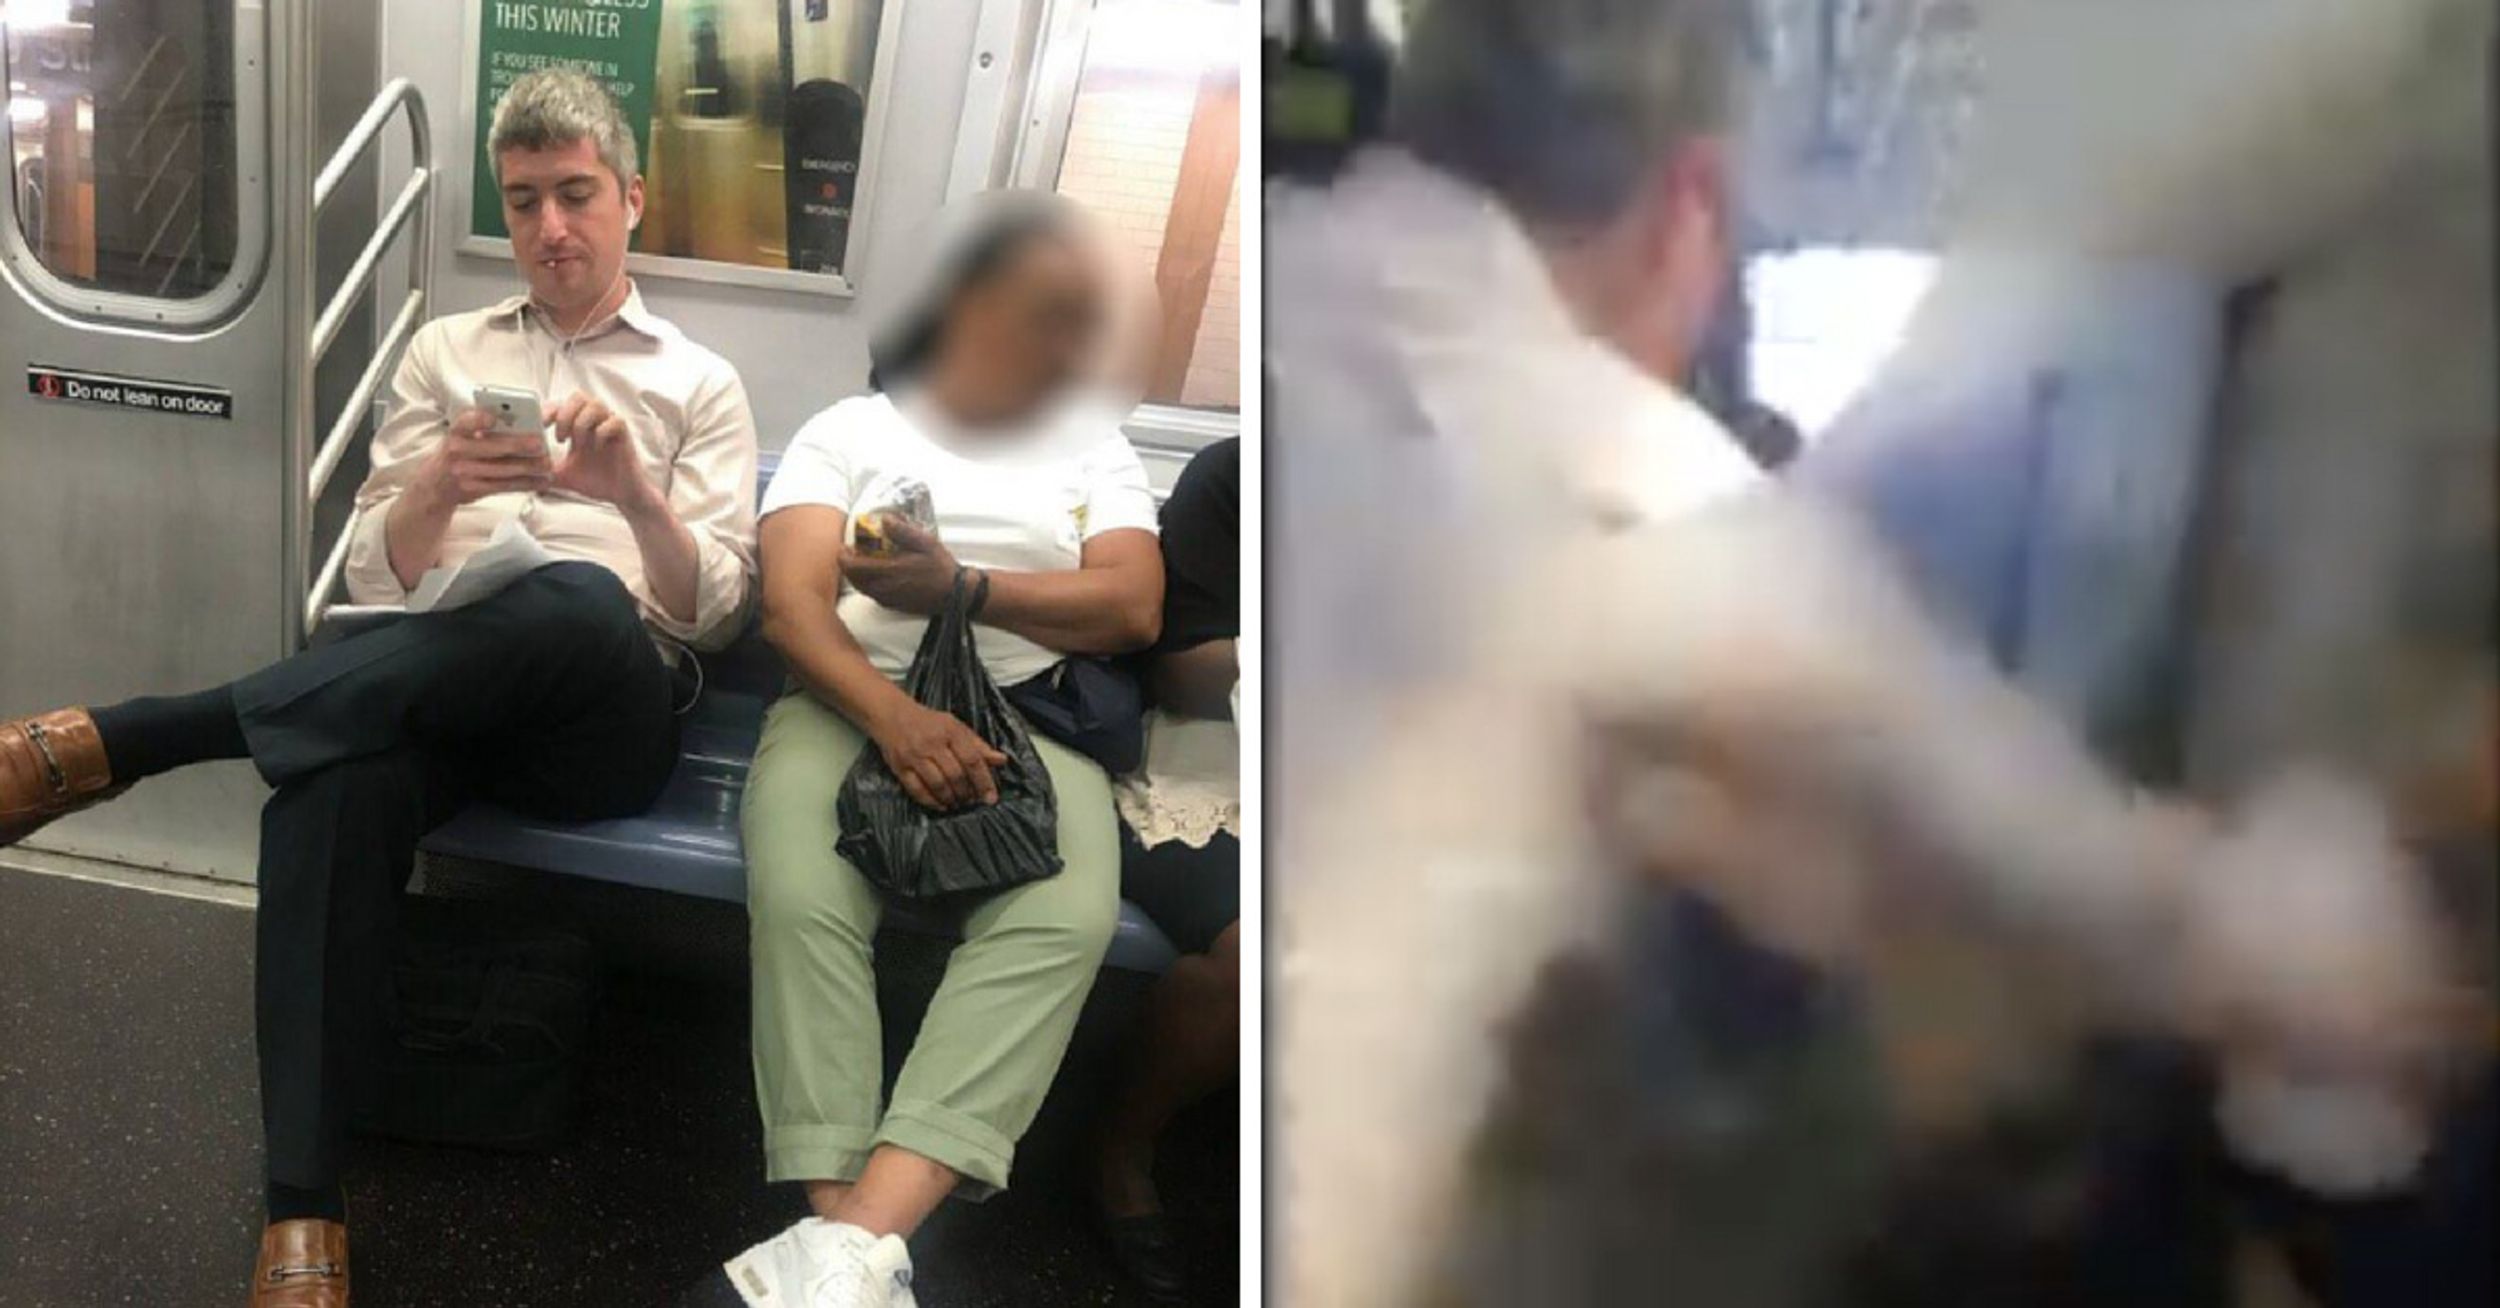 White Man Spat On And Shoved A Korean Woman After Verbal Assault On The NYC Subway